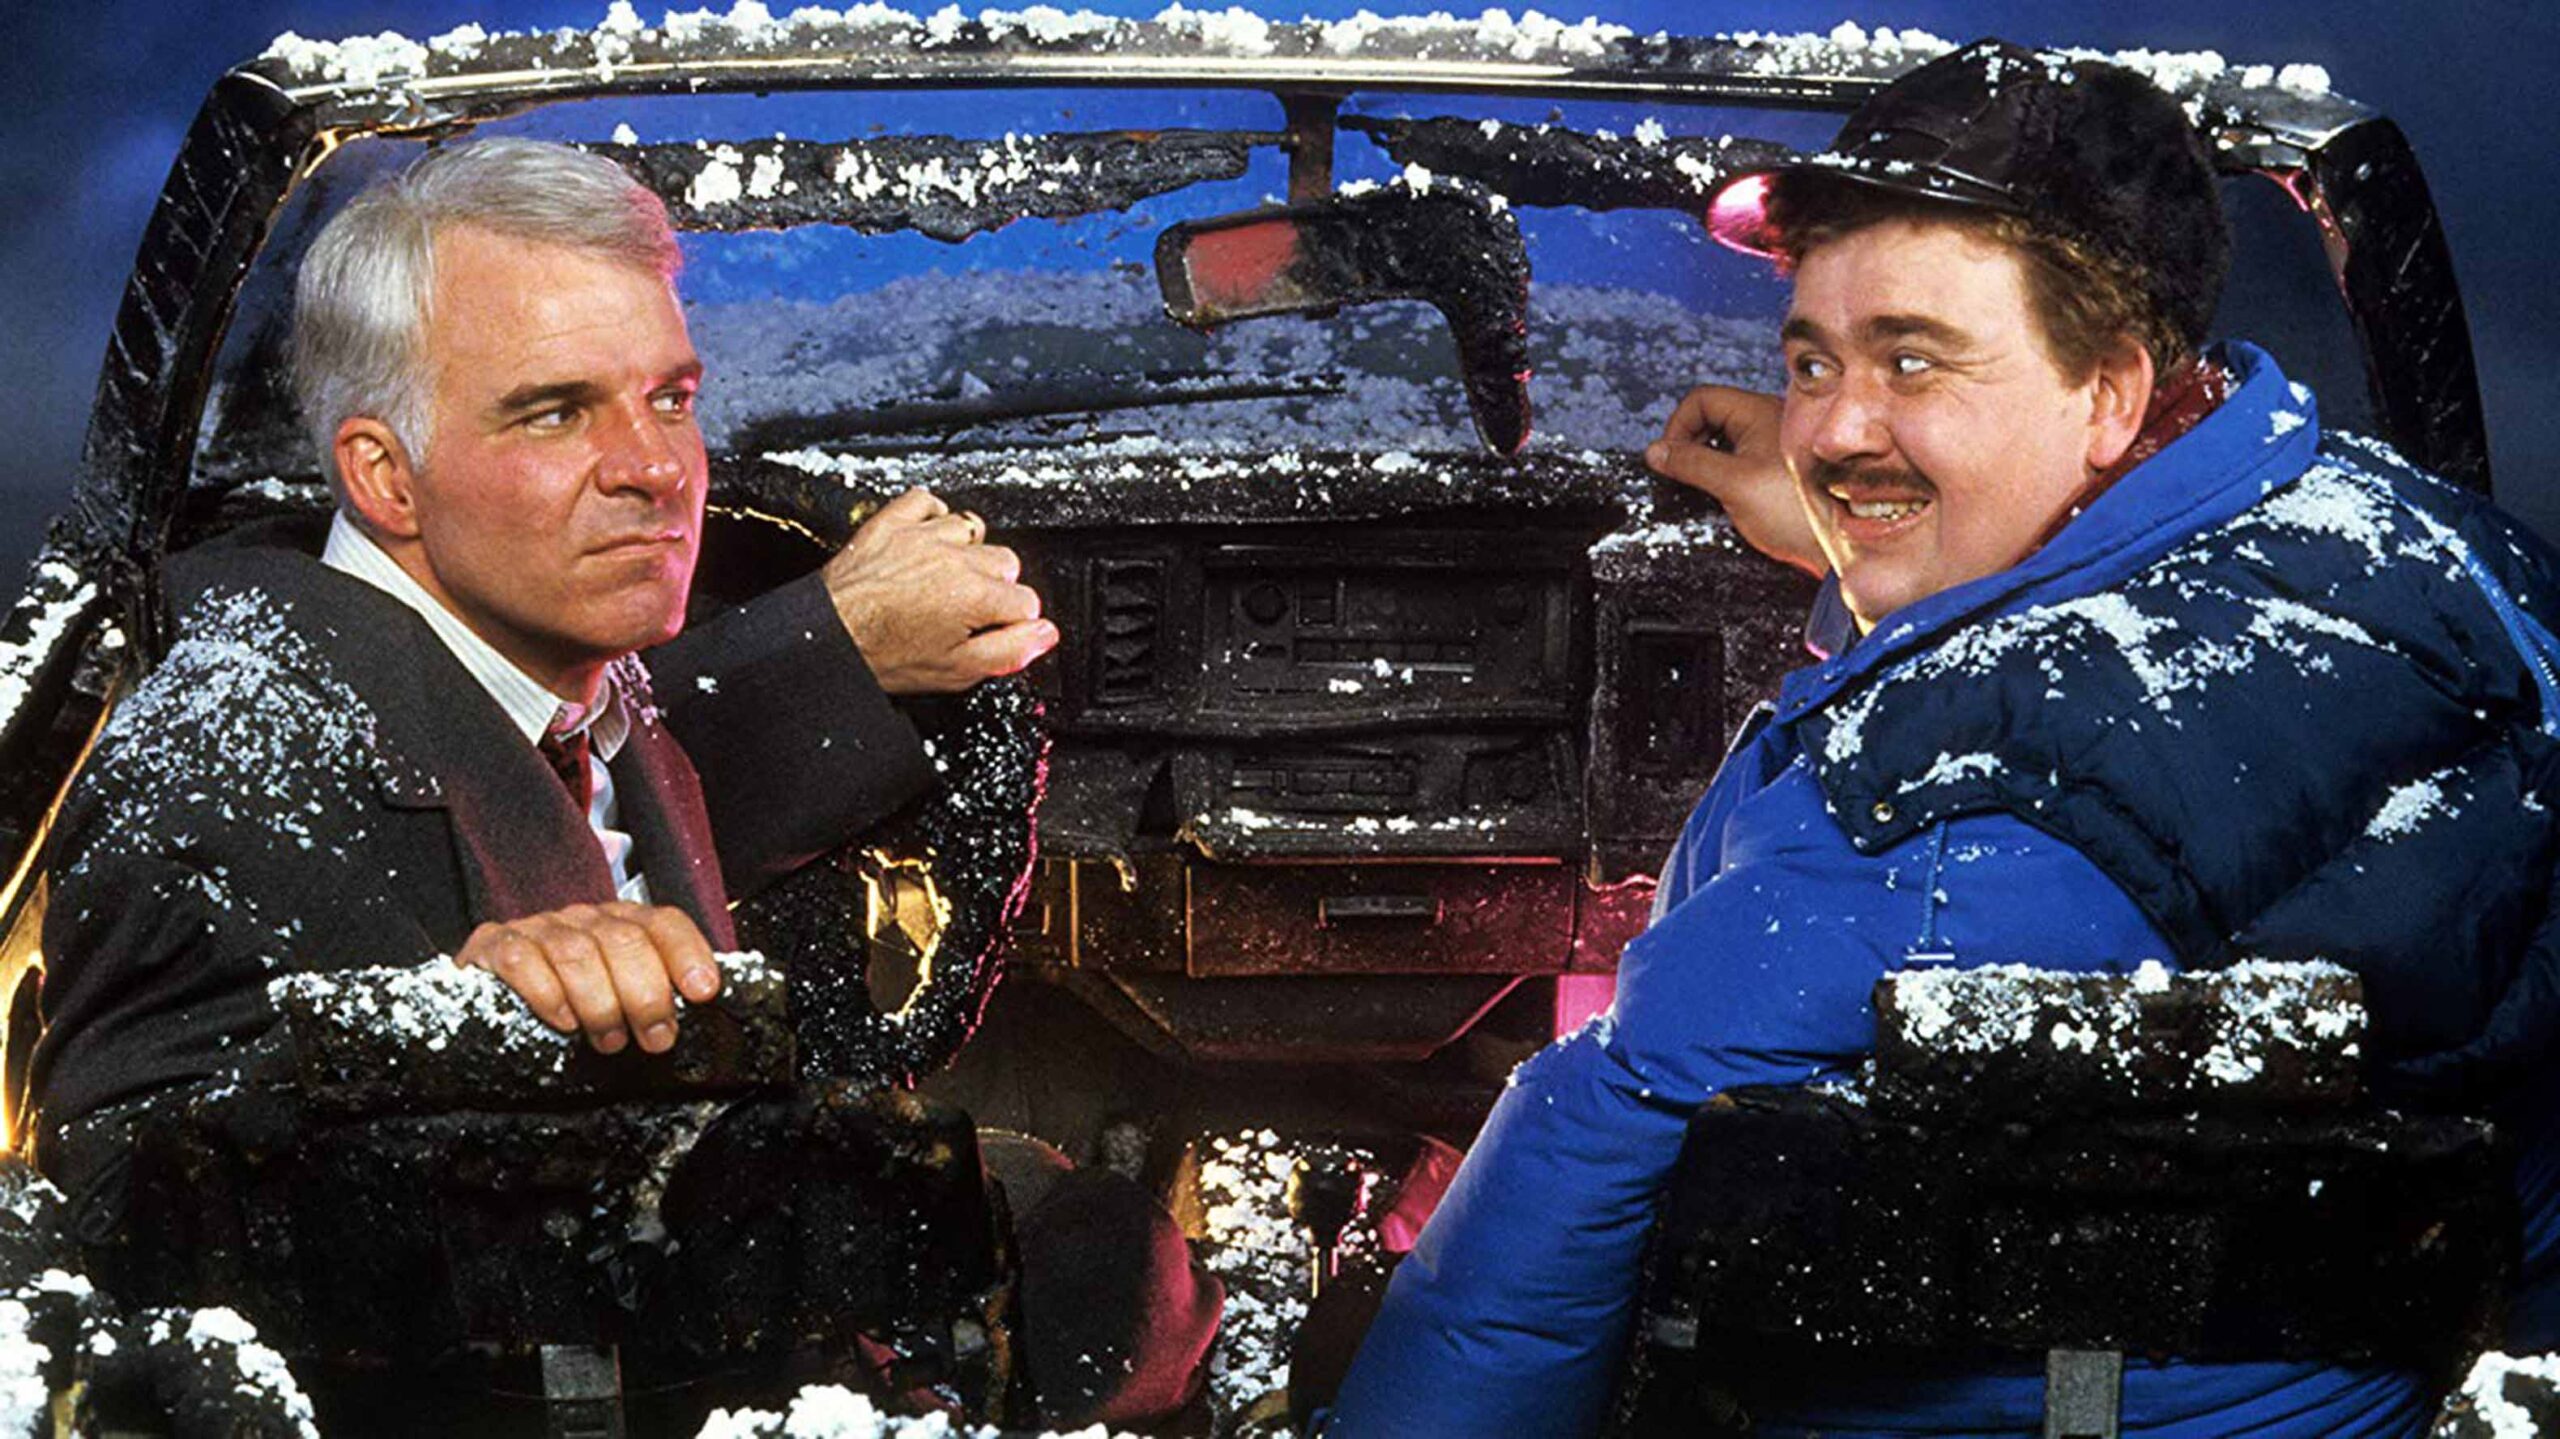 Where to stream the best John Candy movies in Canada